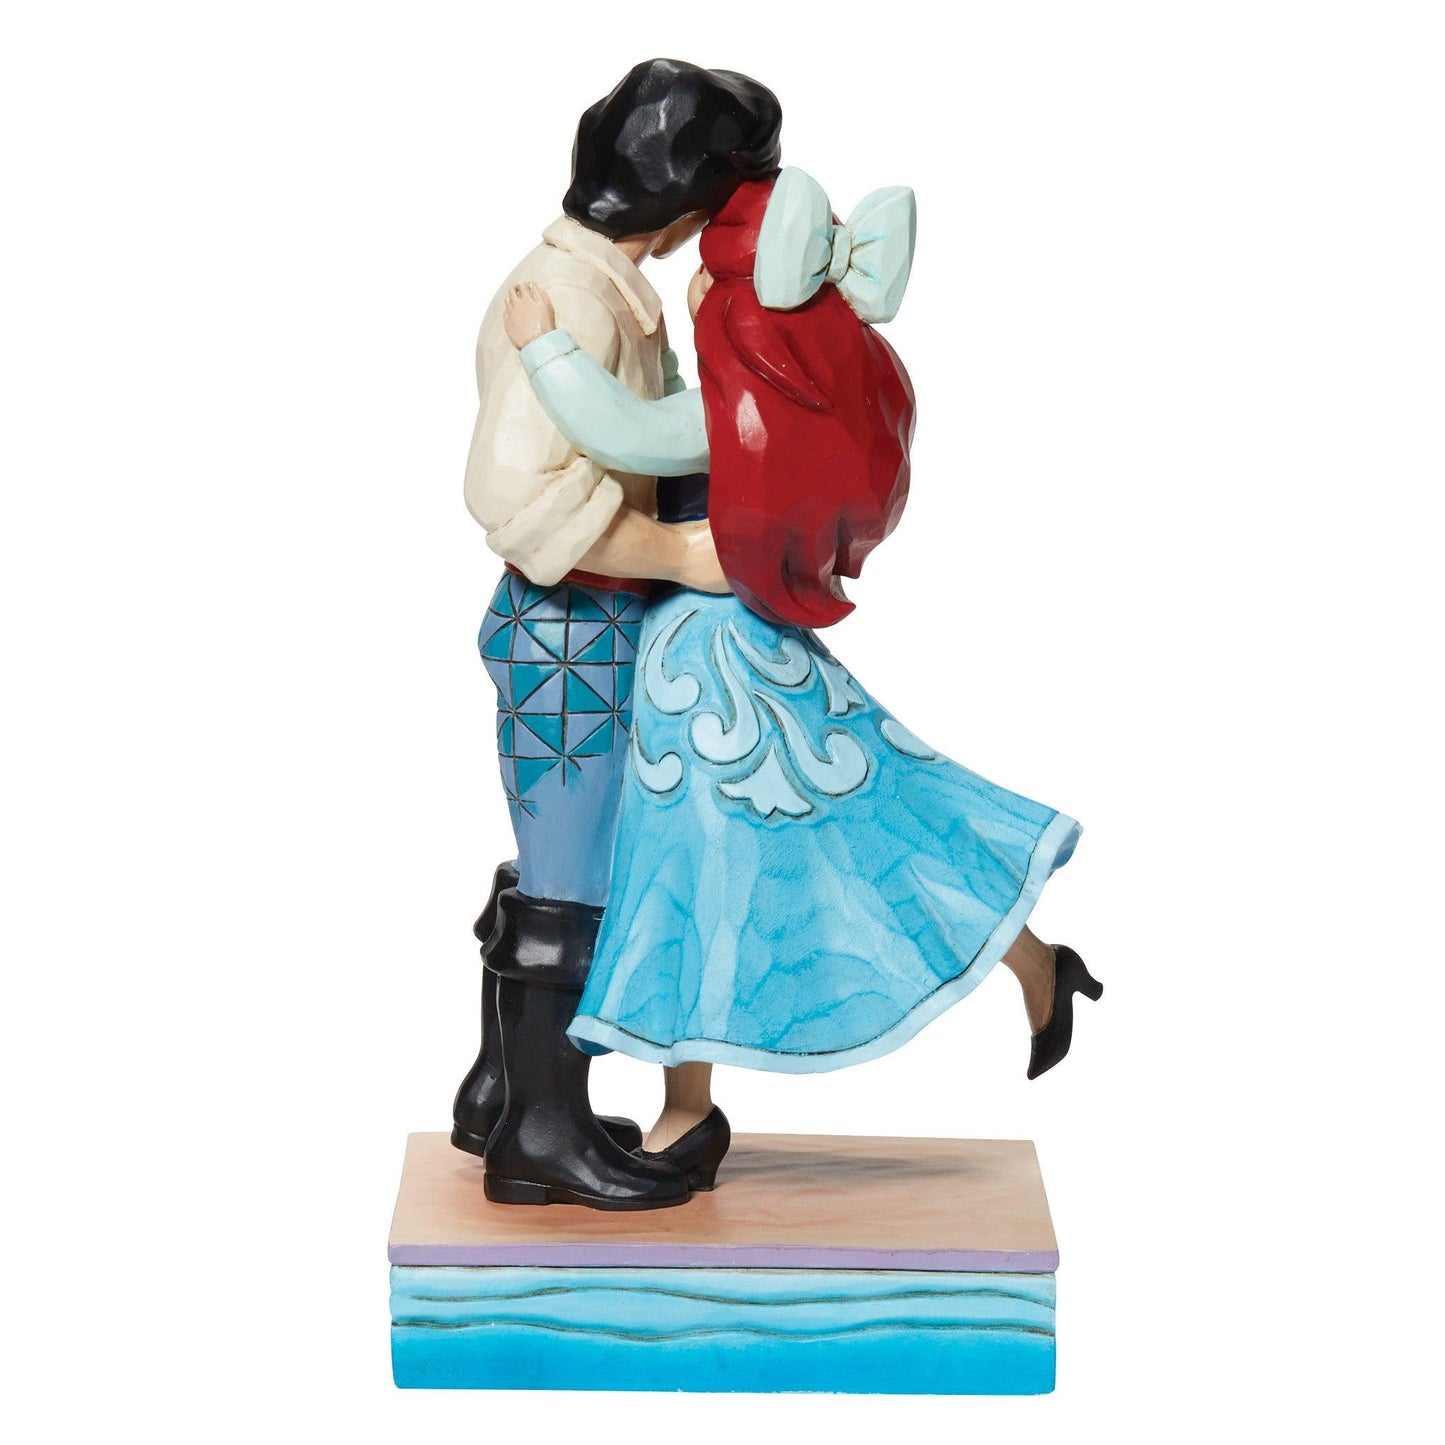 Ariel & Prince Eric Love Figurine - Gallery Gifts Online 